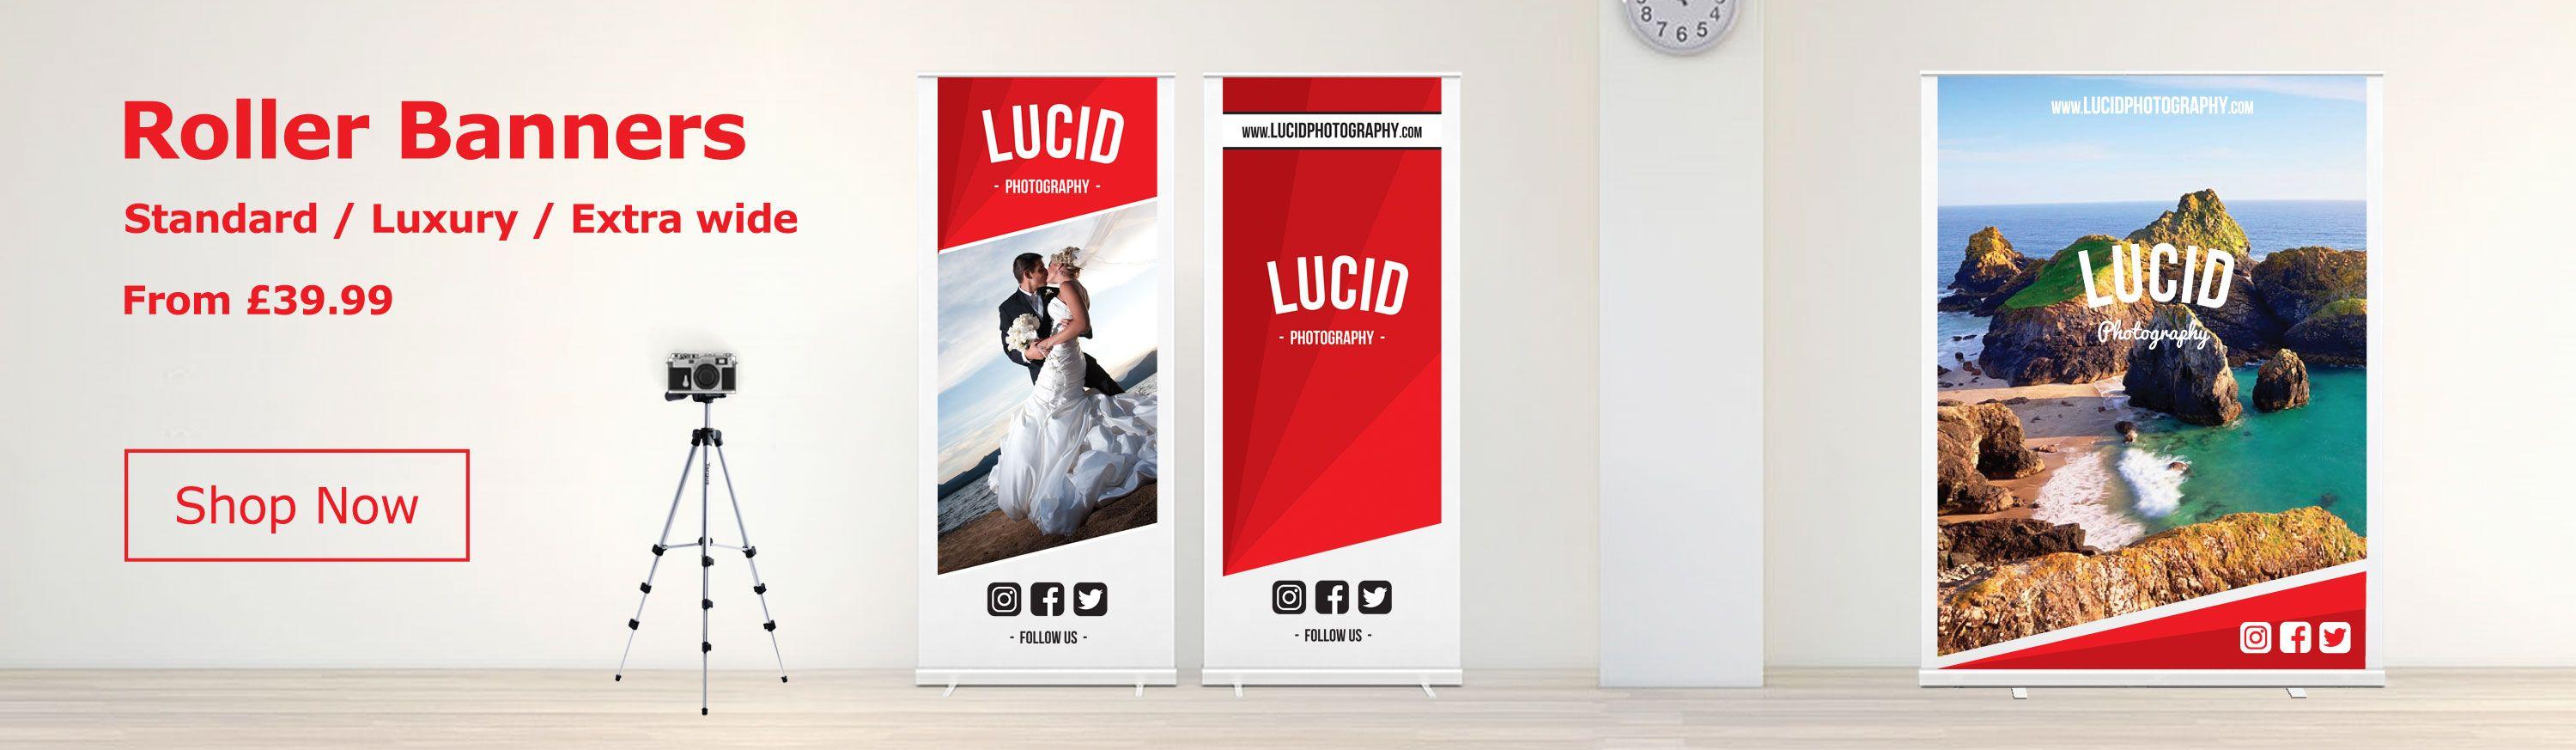 Printing Banners Logo - BrunelOne.com | Business Cards, Flyers, Roller Banners, Notepads